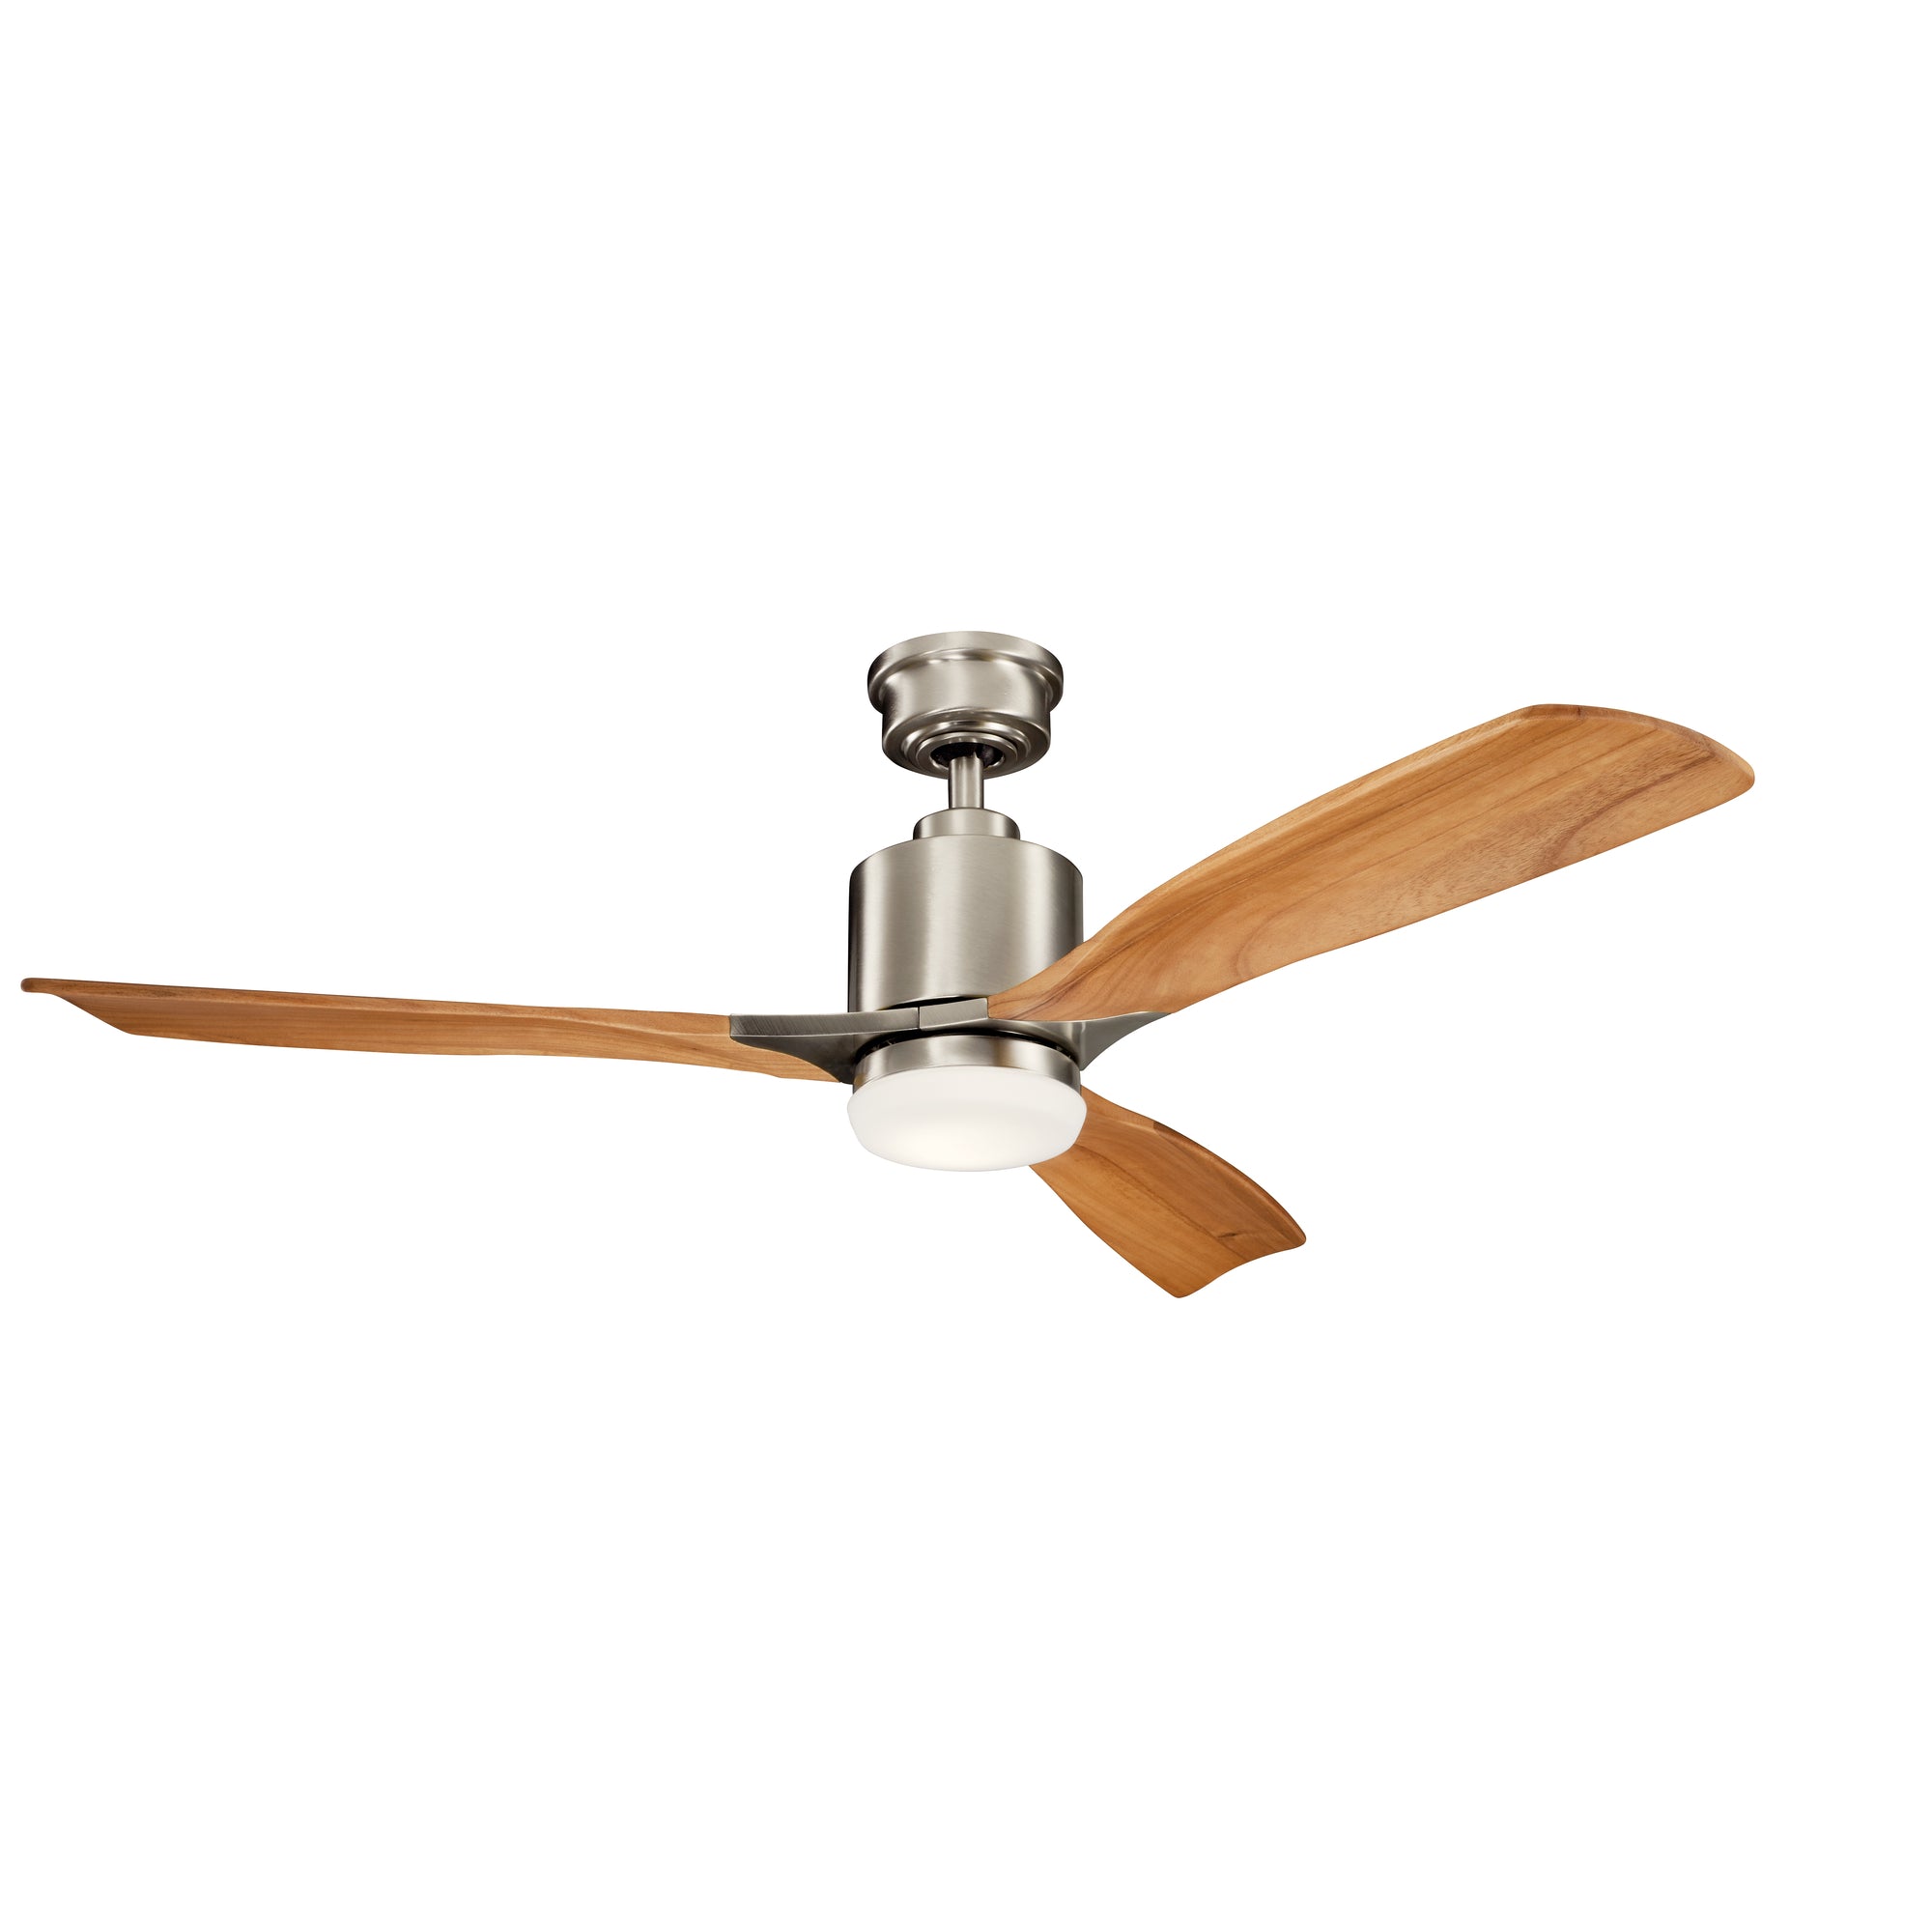 RIDLEY II Ceiling fan Stainless steel INTEGRATED LED - 300027BSS | KICHLER